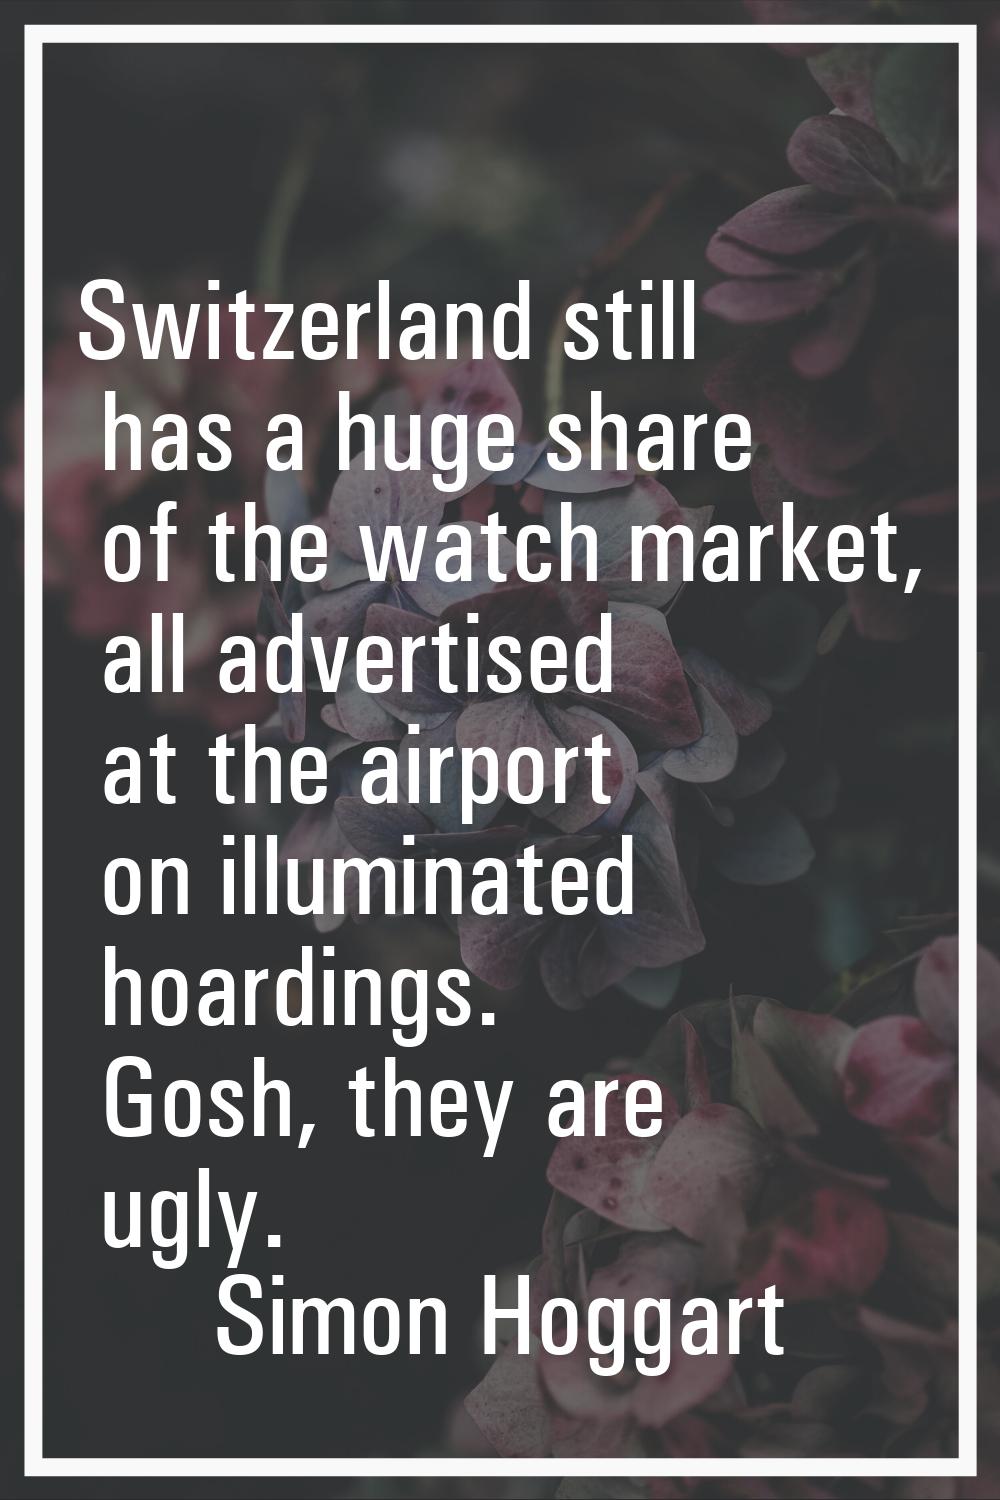 Switzerland still has a huge share of the watch market, all advertised at the airport on illuminate